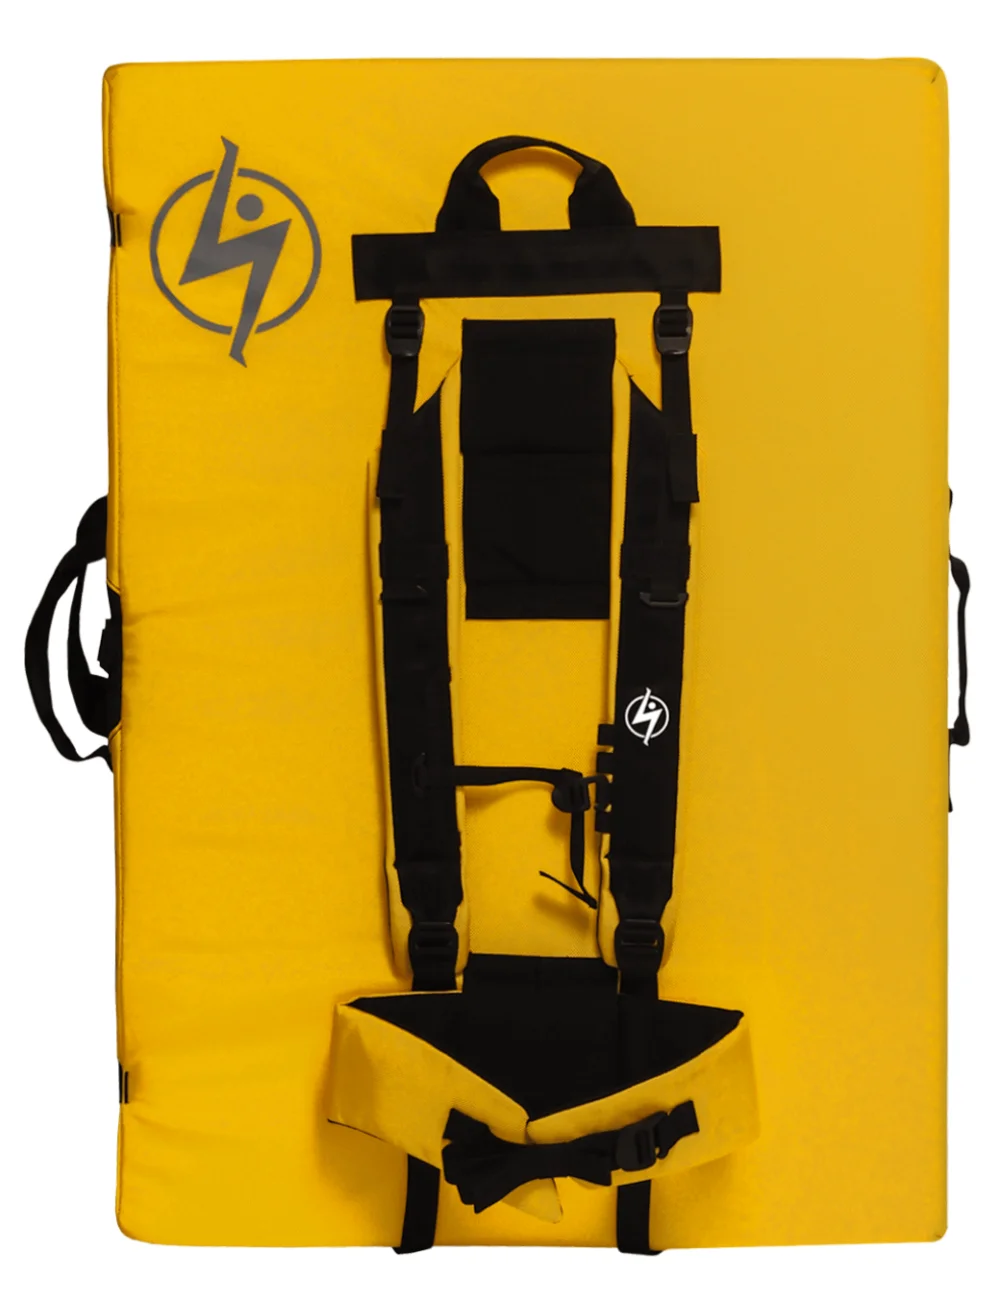 yellow crash pad with padded should straps and padded waist belt